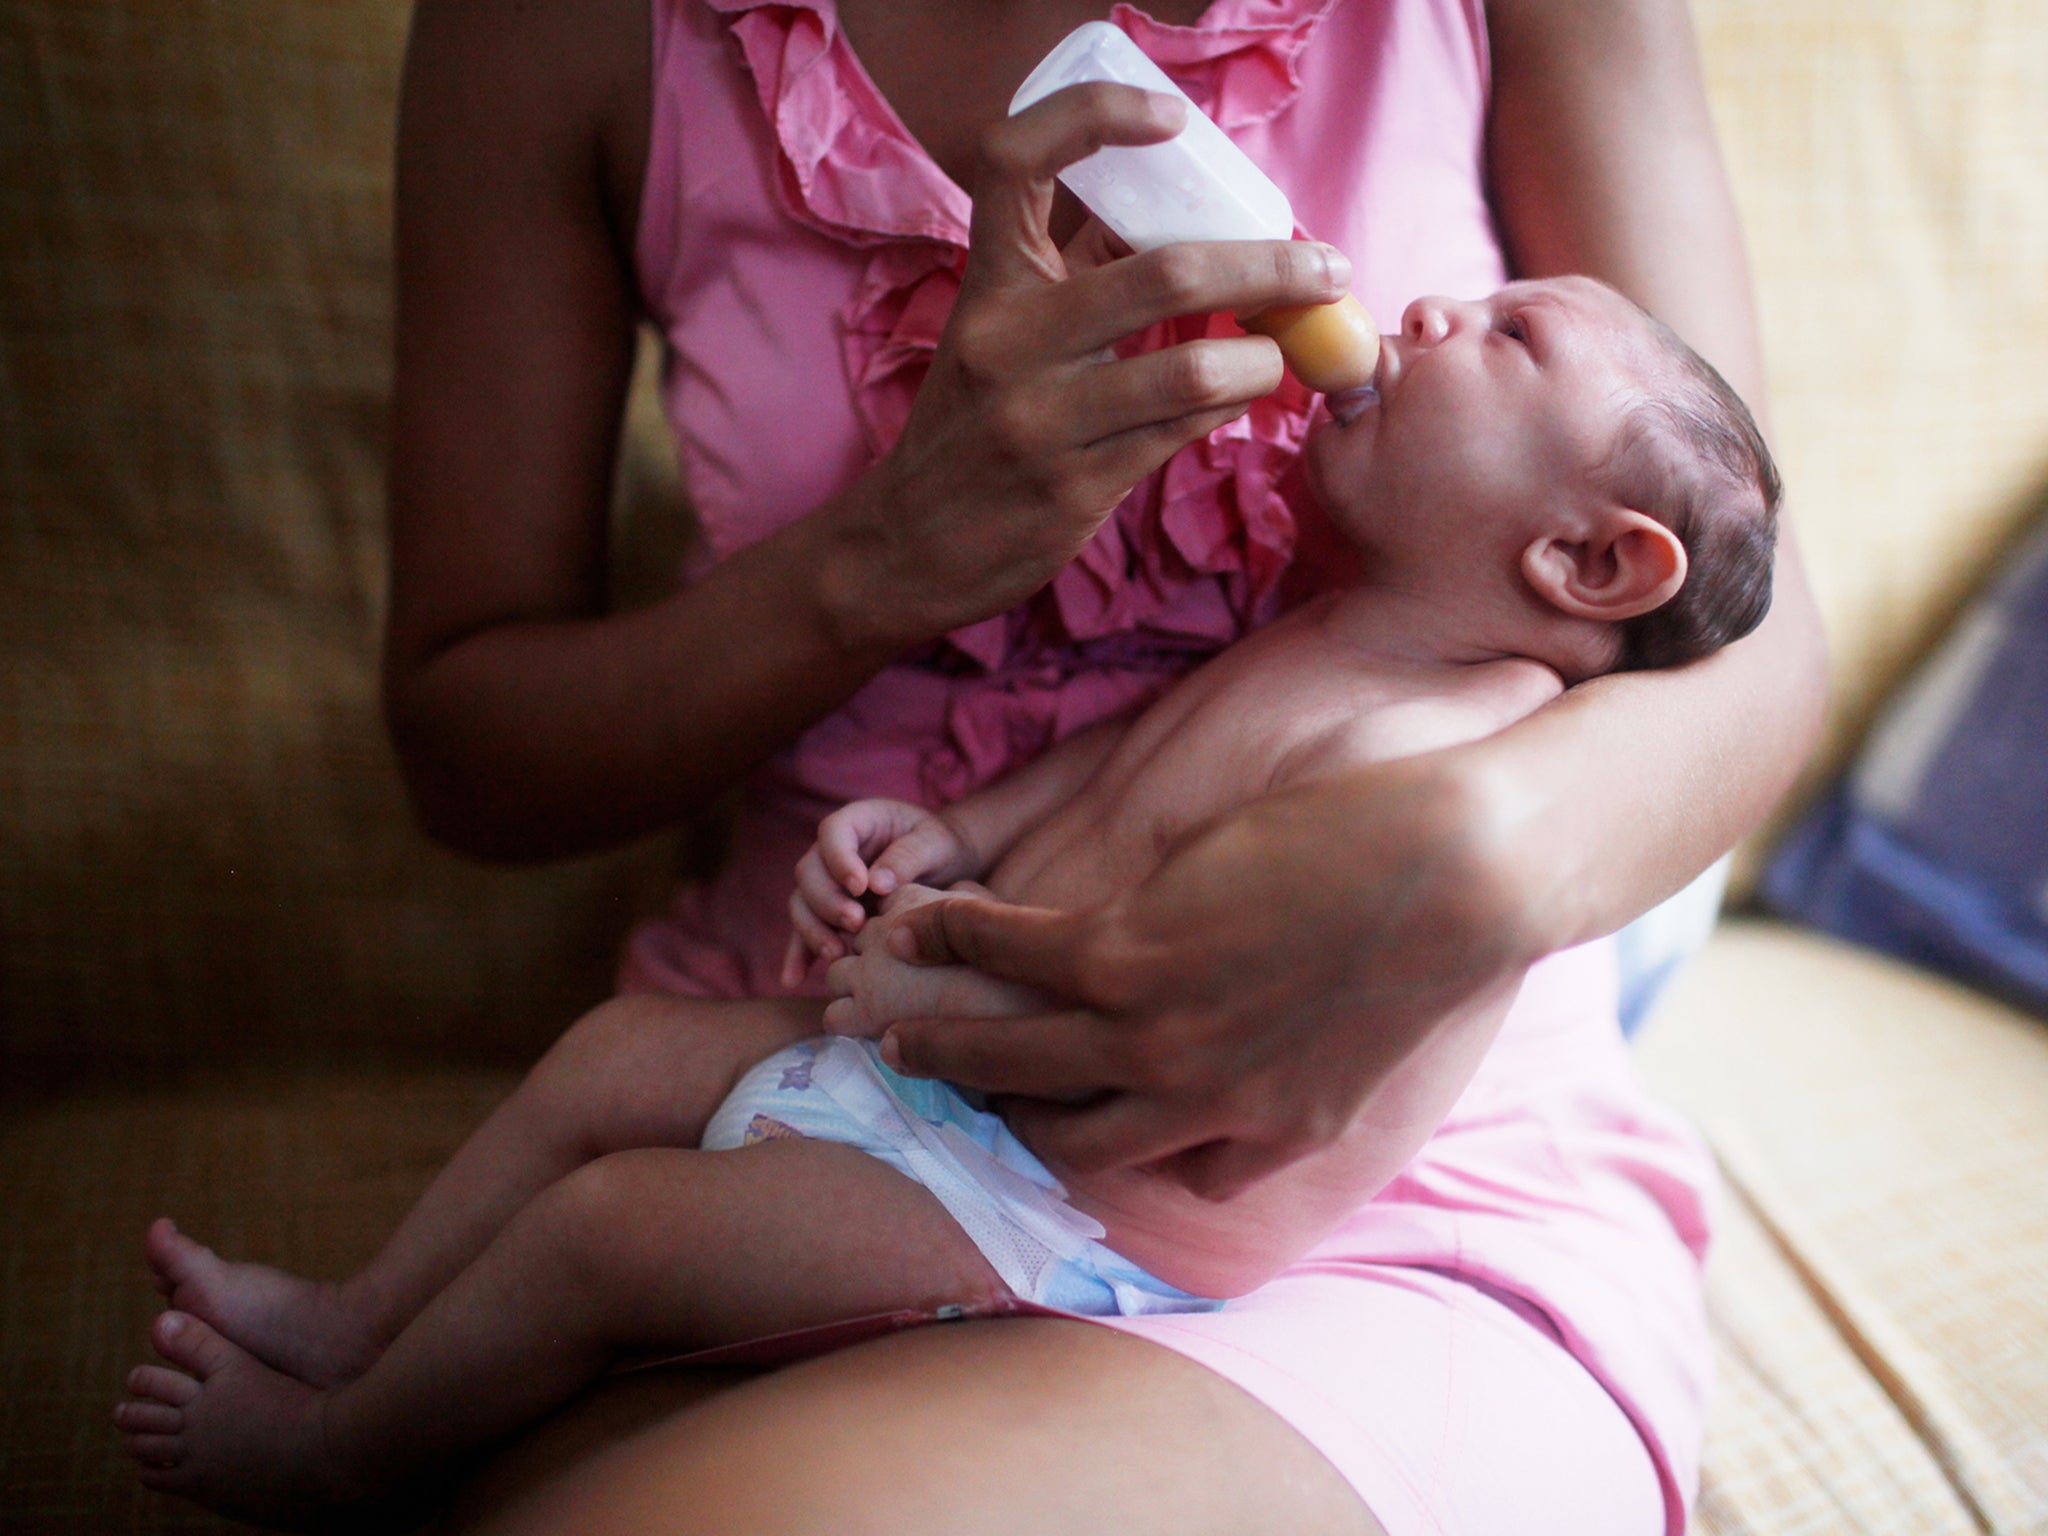 Zika virus can cause microcephaly if contracted by pregnant women, which results in an abnormally small head in newborn children